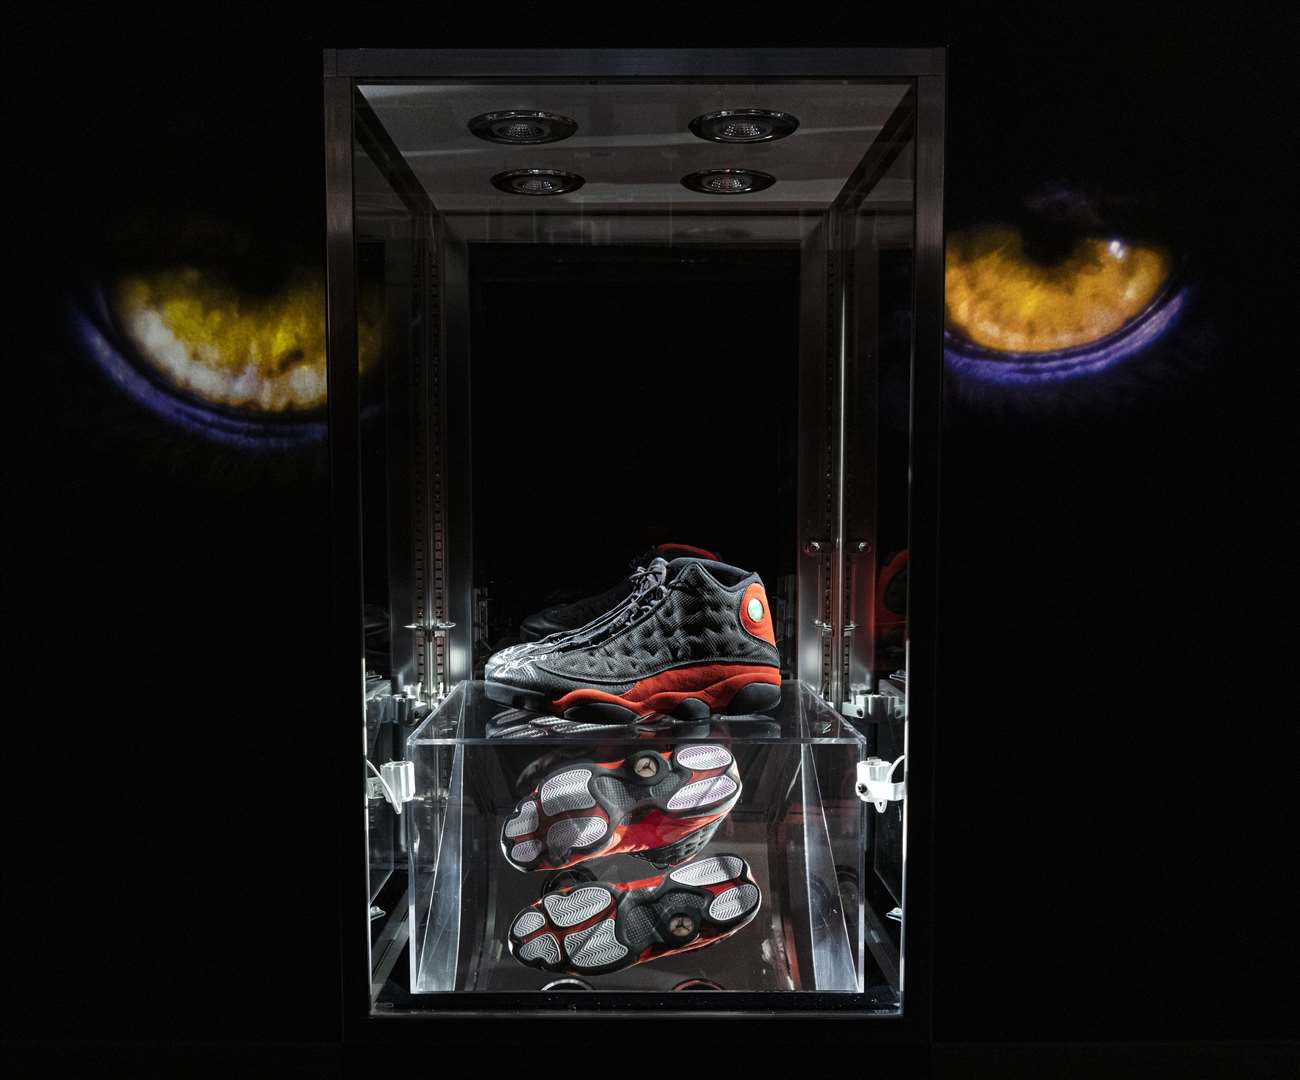 Michael Jordan’s sneakers which have sold at auction for more than 2.2 million dollars (Sotheby’s)